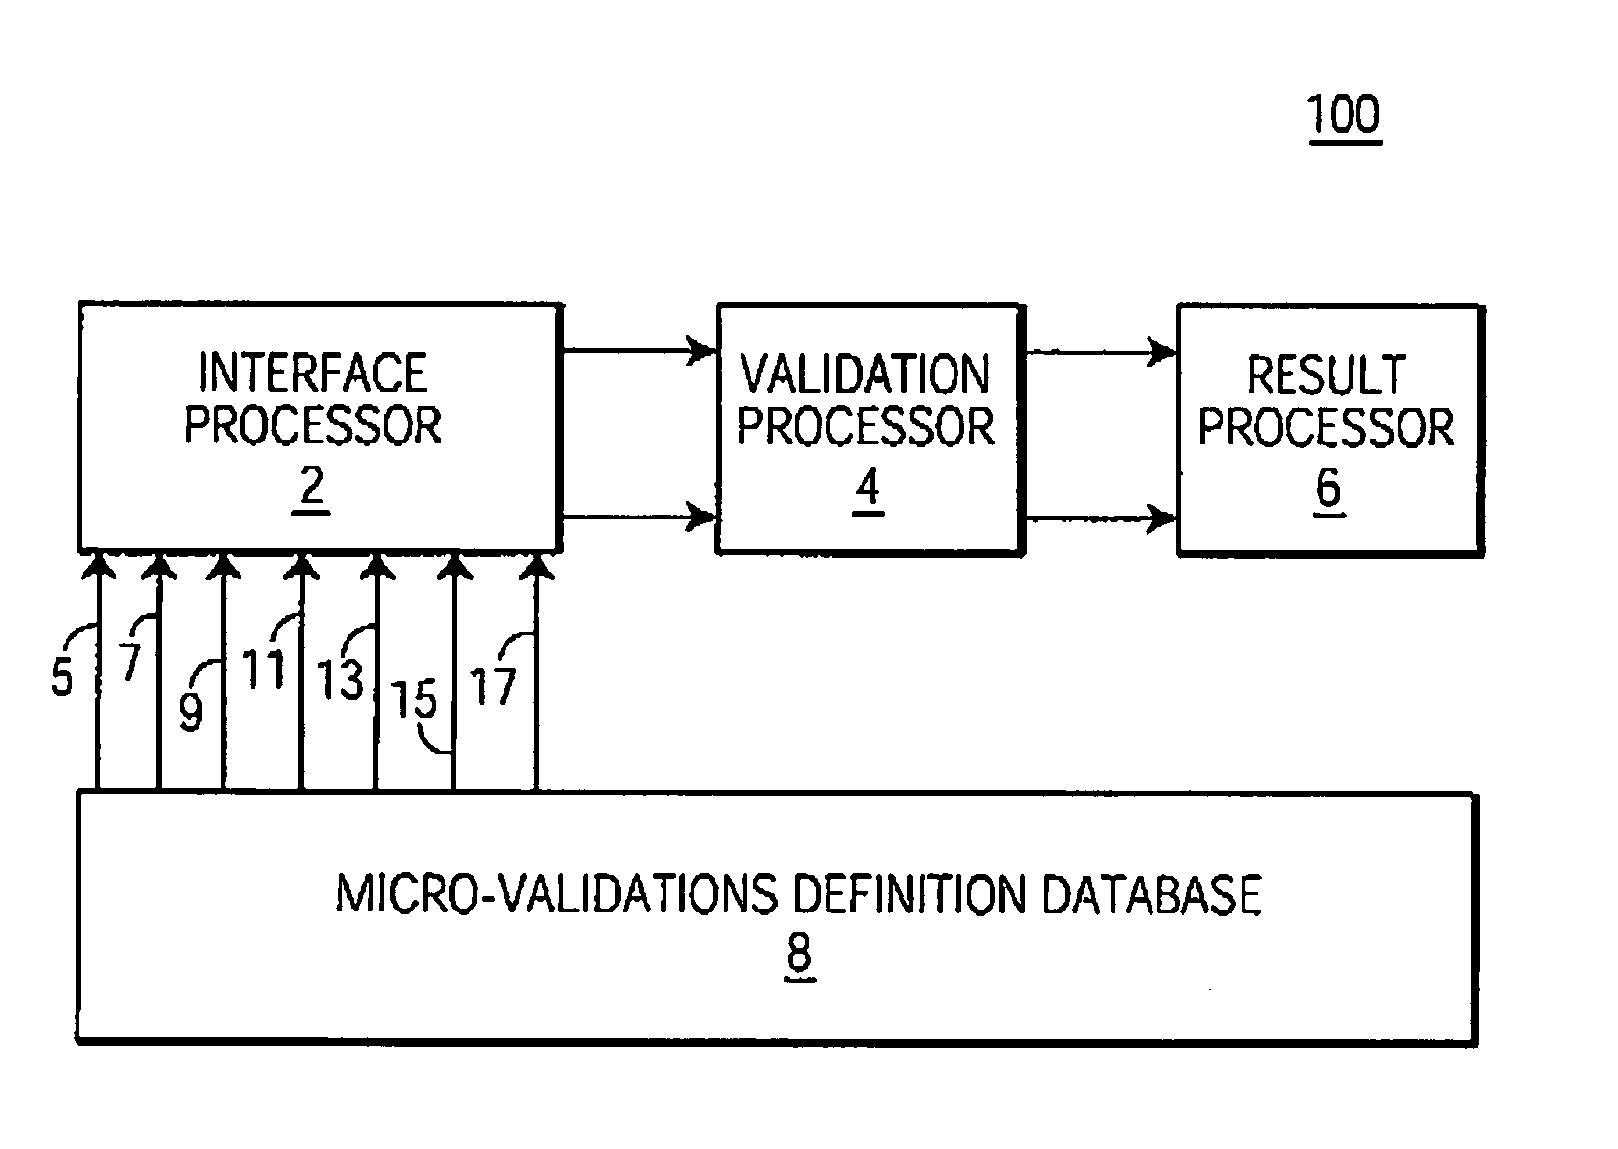 System and method for processing information related to laboratory tests and results